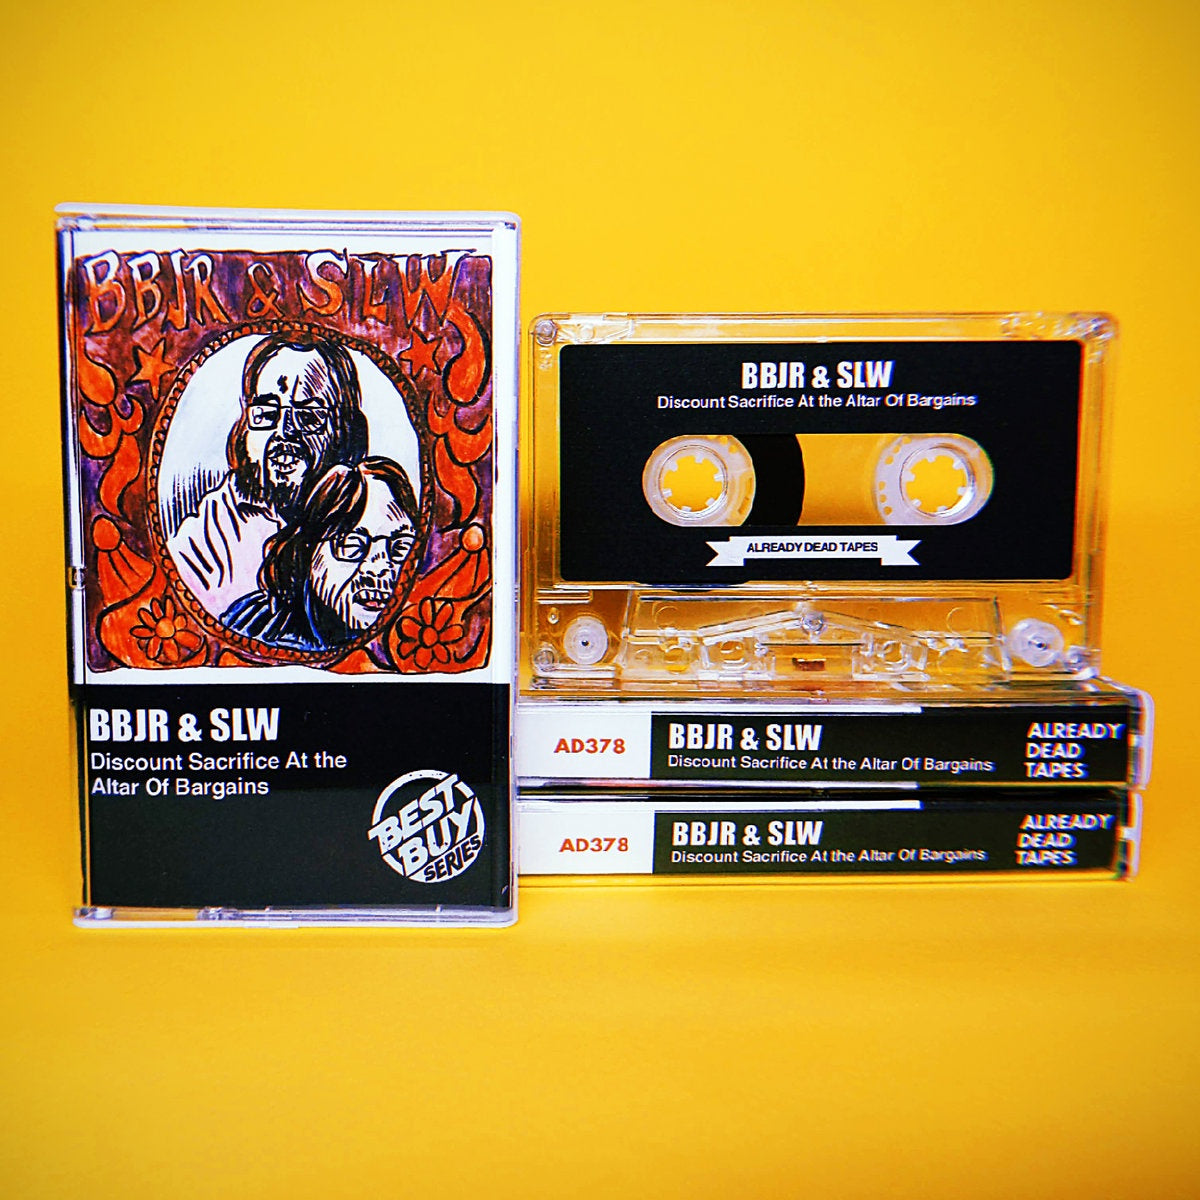 BBJR & SLW – Discount Sacrifice At The Altar Of Bargains - New Cassette 2021 Already Dead Tape - Experimental Rock